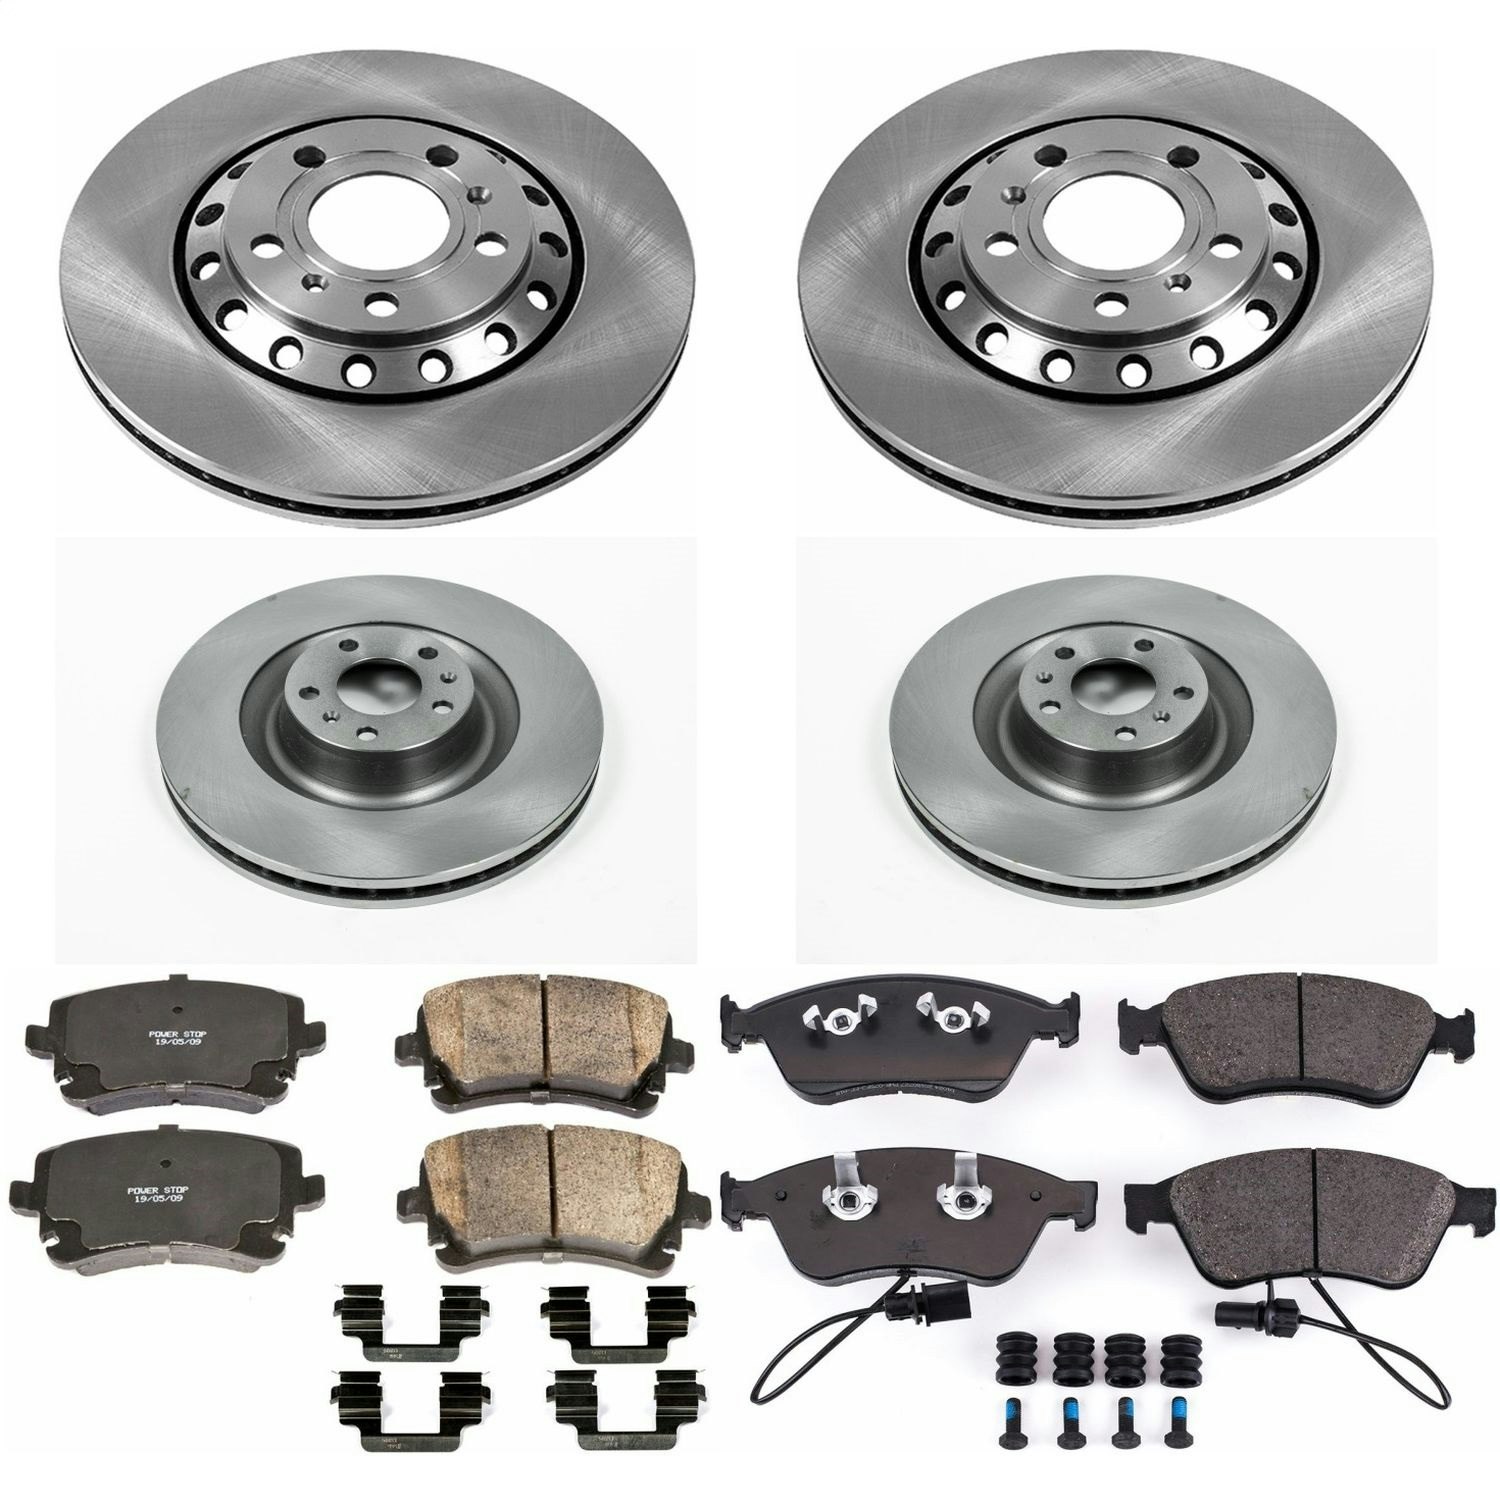 KOE4247 Autospecialty Daily Driver OE Brake Kit Front and Rear 